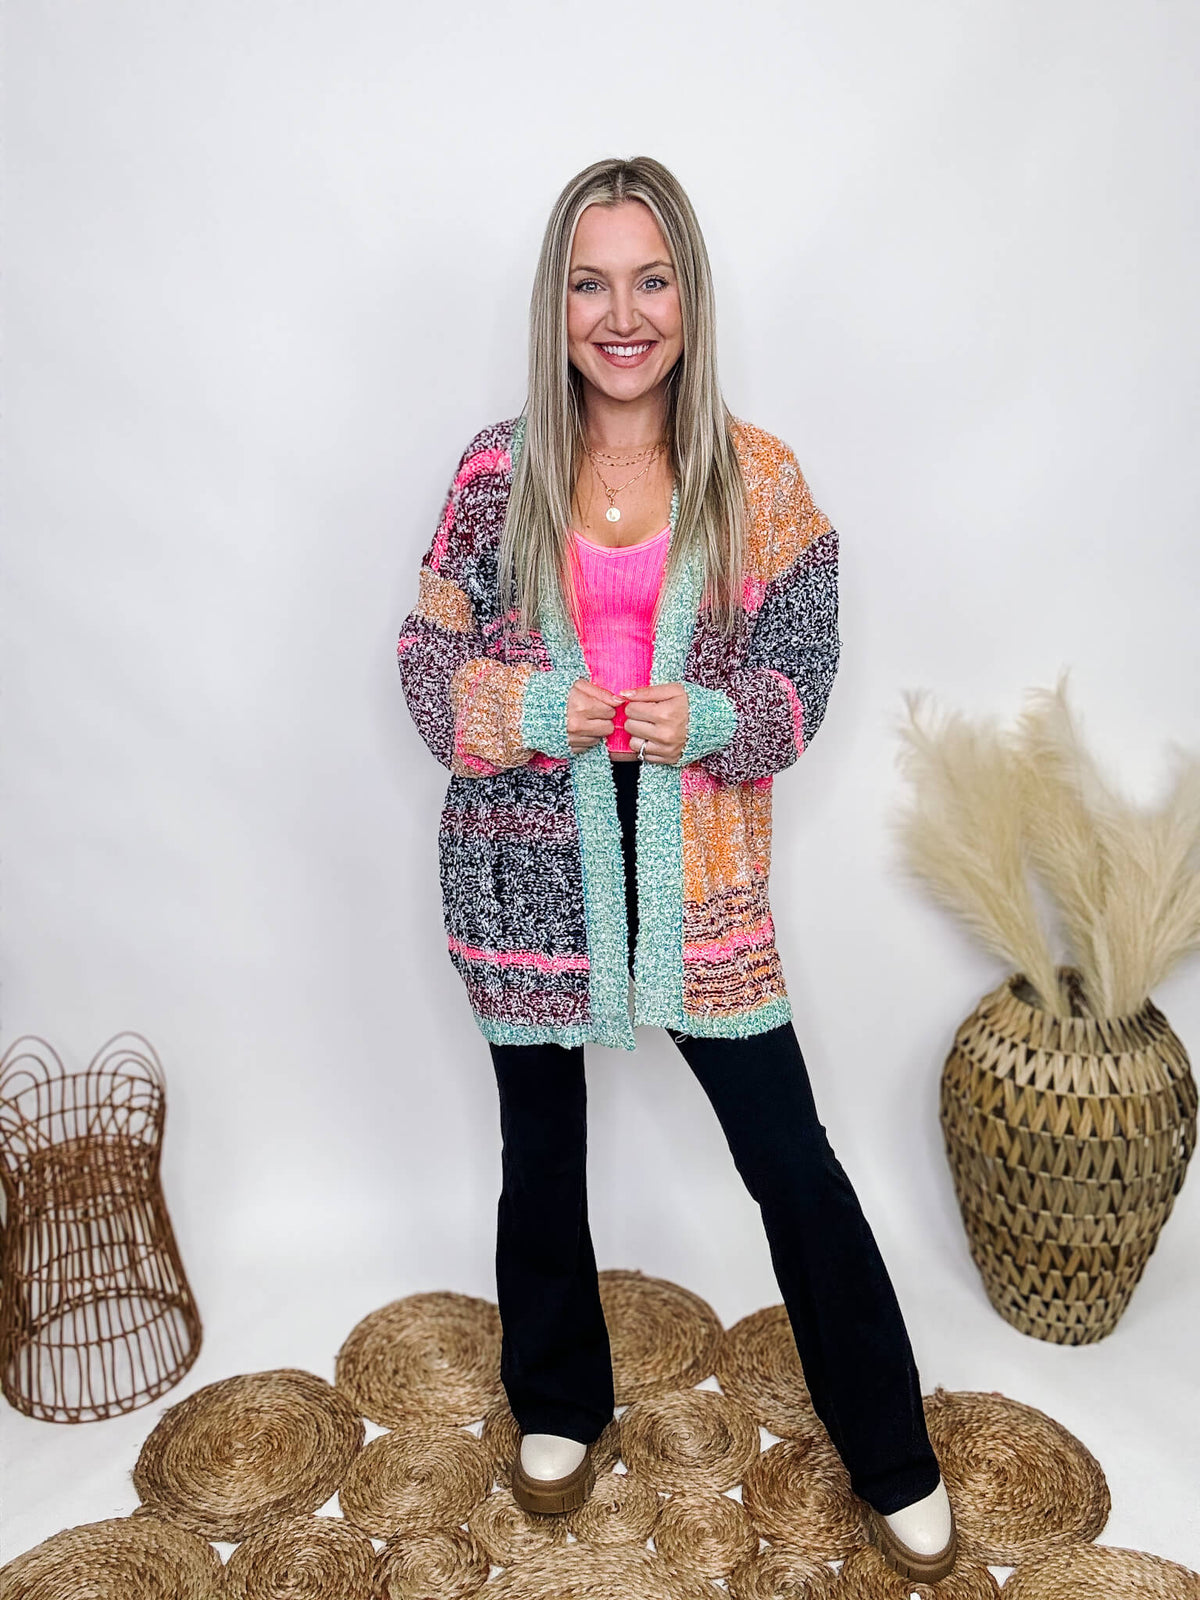 &Merci Multicolor Colorblock Cardigan Long Sleeves Fuzzy Textured Knit Oversized Fit 95% Acrylic, 5% Polyester